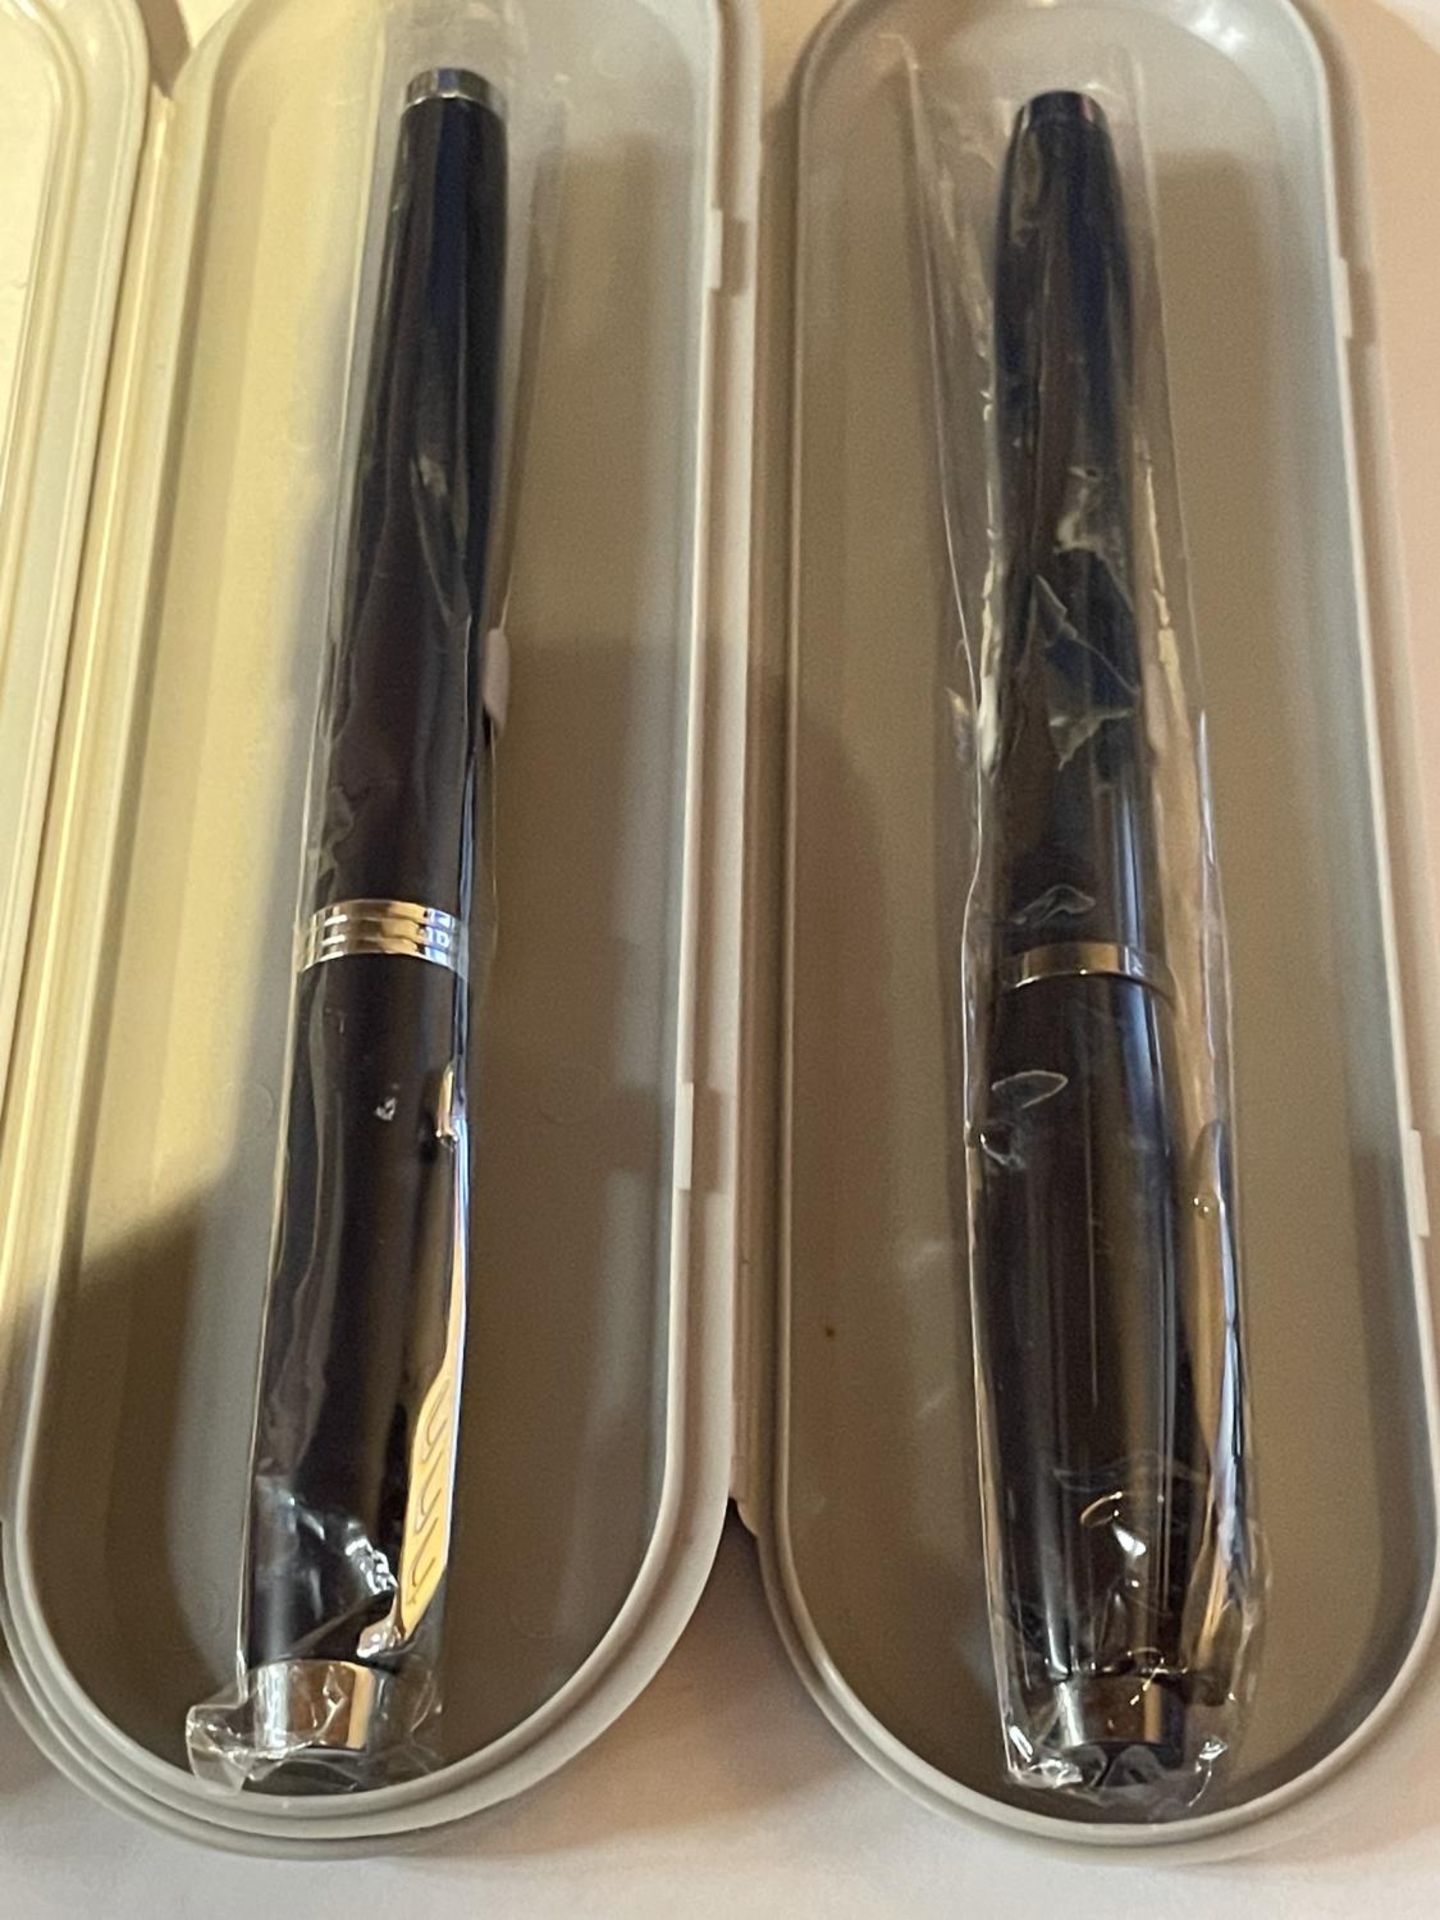 TWO NEW AND BOXED PARKER FOUNTAIN PENS ONE MATT BLUE IM SERIES WITH FINE NIB AND ONE BLACK FORSET - Image 2 of 2